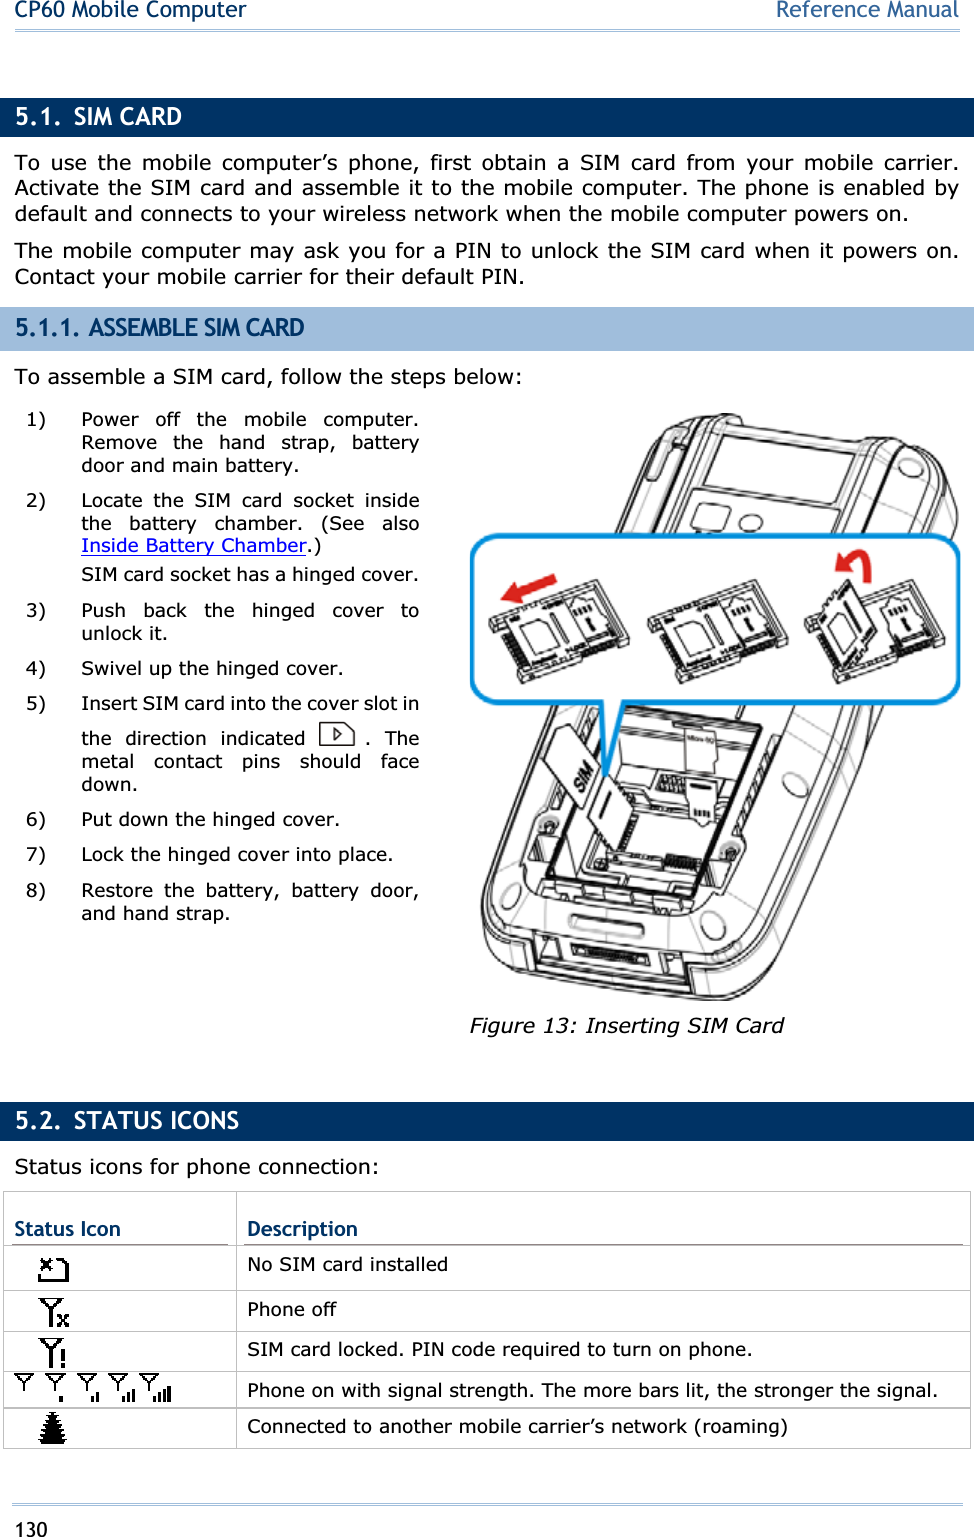 130CP60 Mobile Computer Reference Manual5.1. SIM CARD To use the mobile computer’s phone, first obtain a SIM card from your mobile carrier. Activate the SIM card and assemble it to the mobile computer. The phone is enabled by default and connects to your wireless network when the mobile computer powers on. The mobile computer may ask you for a PIN to unlock the SIM card when it powers on. Contact your mobile carrier for their default PIN. 5.1.1. ASSEMBLE SIM CARD To assemble a SIM card, follow the steps below: 1)  Power off the mobile computer. Remove the hand strap, battery door and main battery. 2)  Locate the SIM card socket inside the battery chamber. (See also Inside Battery Chamber.)SIM card socket has a hinged cover.3)  Push back the hinged cover to unlock it. 4)  Swivel up the hinged cover. 5)  Insert SIM card into the cover slot in the direction indicated  . The metal contact pins should face down.6)  Put down the hinged cover. 7)  Lock the hinged cover into place. 8)  Restore the battery, battery door, and hand strap. Figure 13: Inserting SIM Card 5.2. STATUS ICONS Status icons for phone connection: Status Icon  DescriptionNo SIM card installed Phone off SIM card locked. PIN code required to turn on phone. Phone on with signal strength. The more bars lit, the stronger the signal. Connected to another mobile carrier’s network (roaming) 